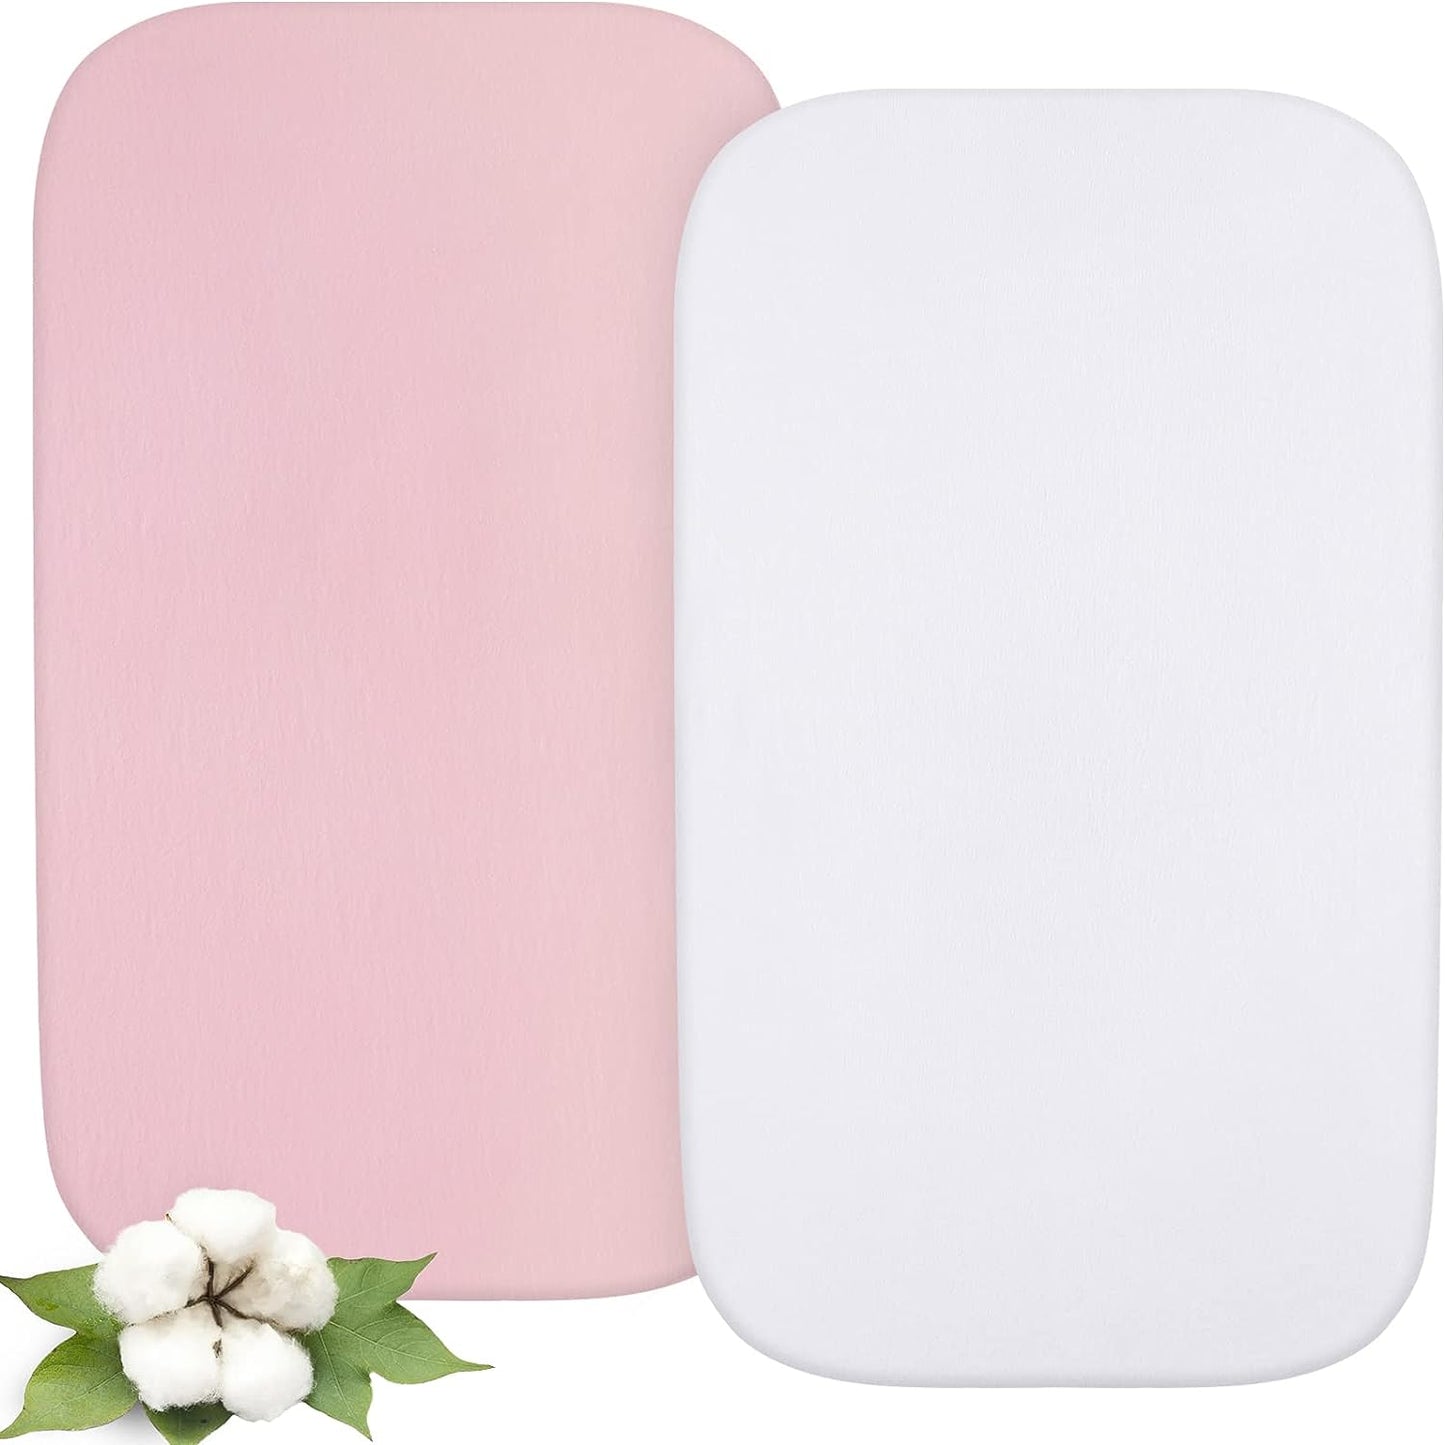 Bassinet Sheets - MiClassic 2in1 Stationary&Rock Bassinet, 2 Pack, 100% Organic Cotton, Pink & White-Biloban online store